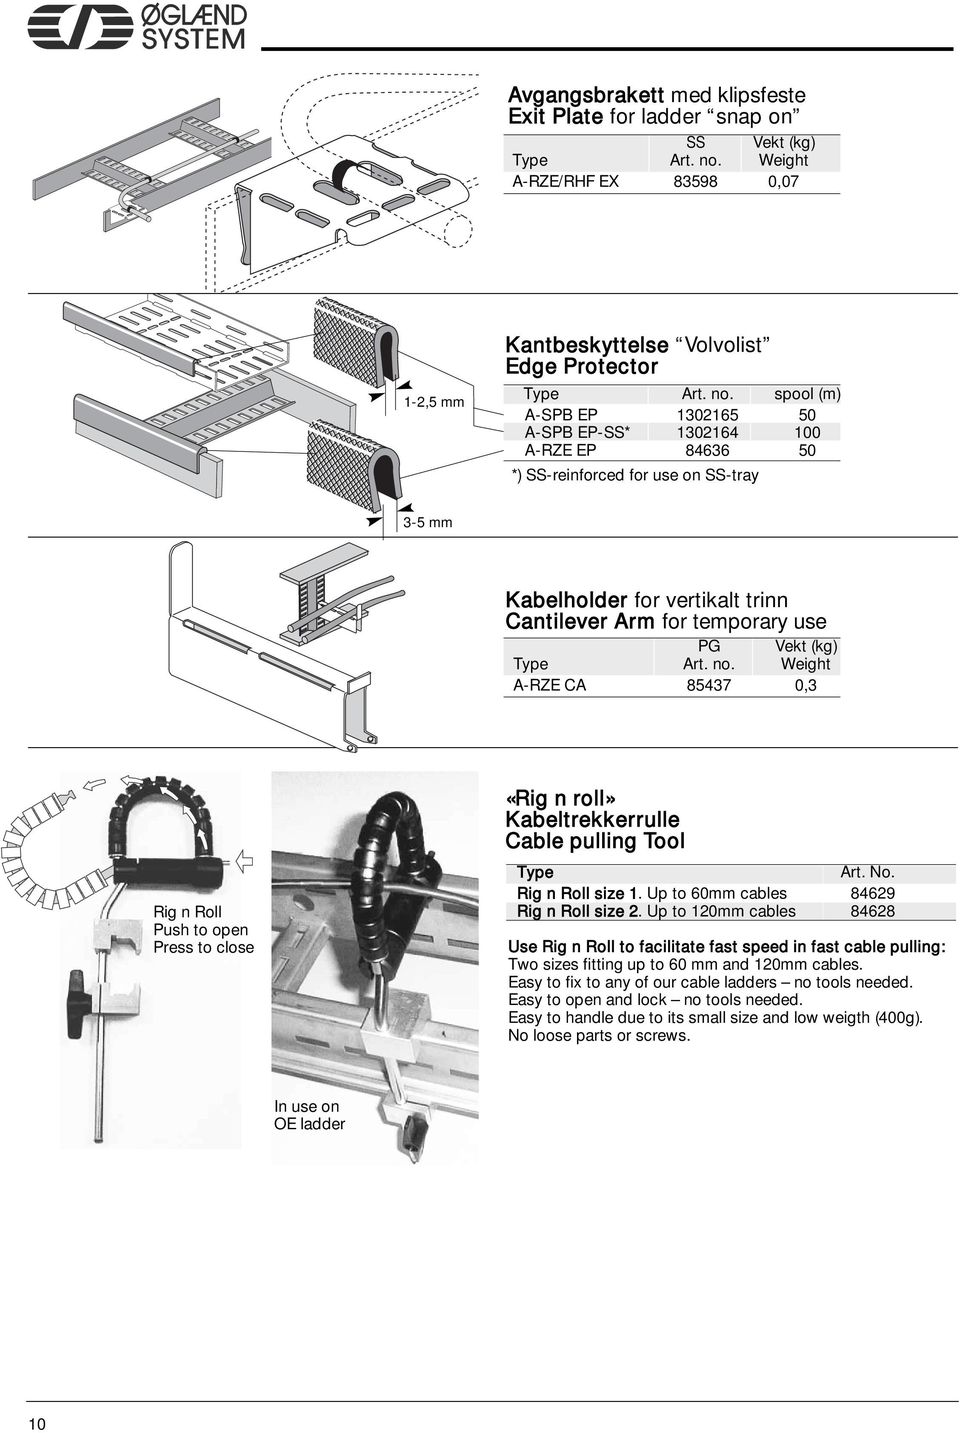 85437 0,3 Rig n Roll Push to open Press to close «Rig n roll» Kabeltrekkerrulle Cable pulling Tool Type Art. No. Rig n Roll size 1. Up to 60mm cables 84629 Rig n Roll size 2.